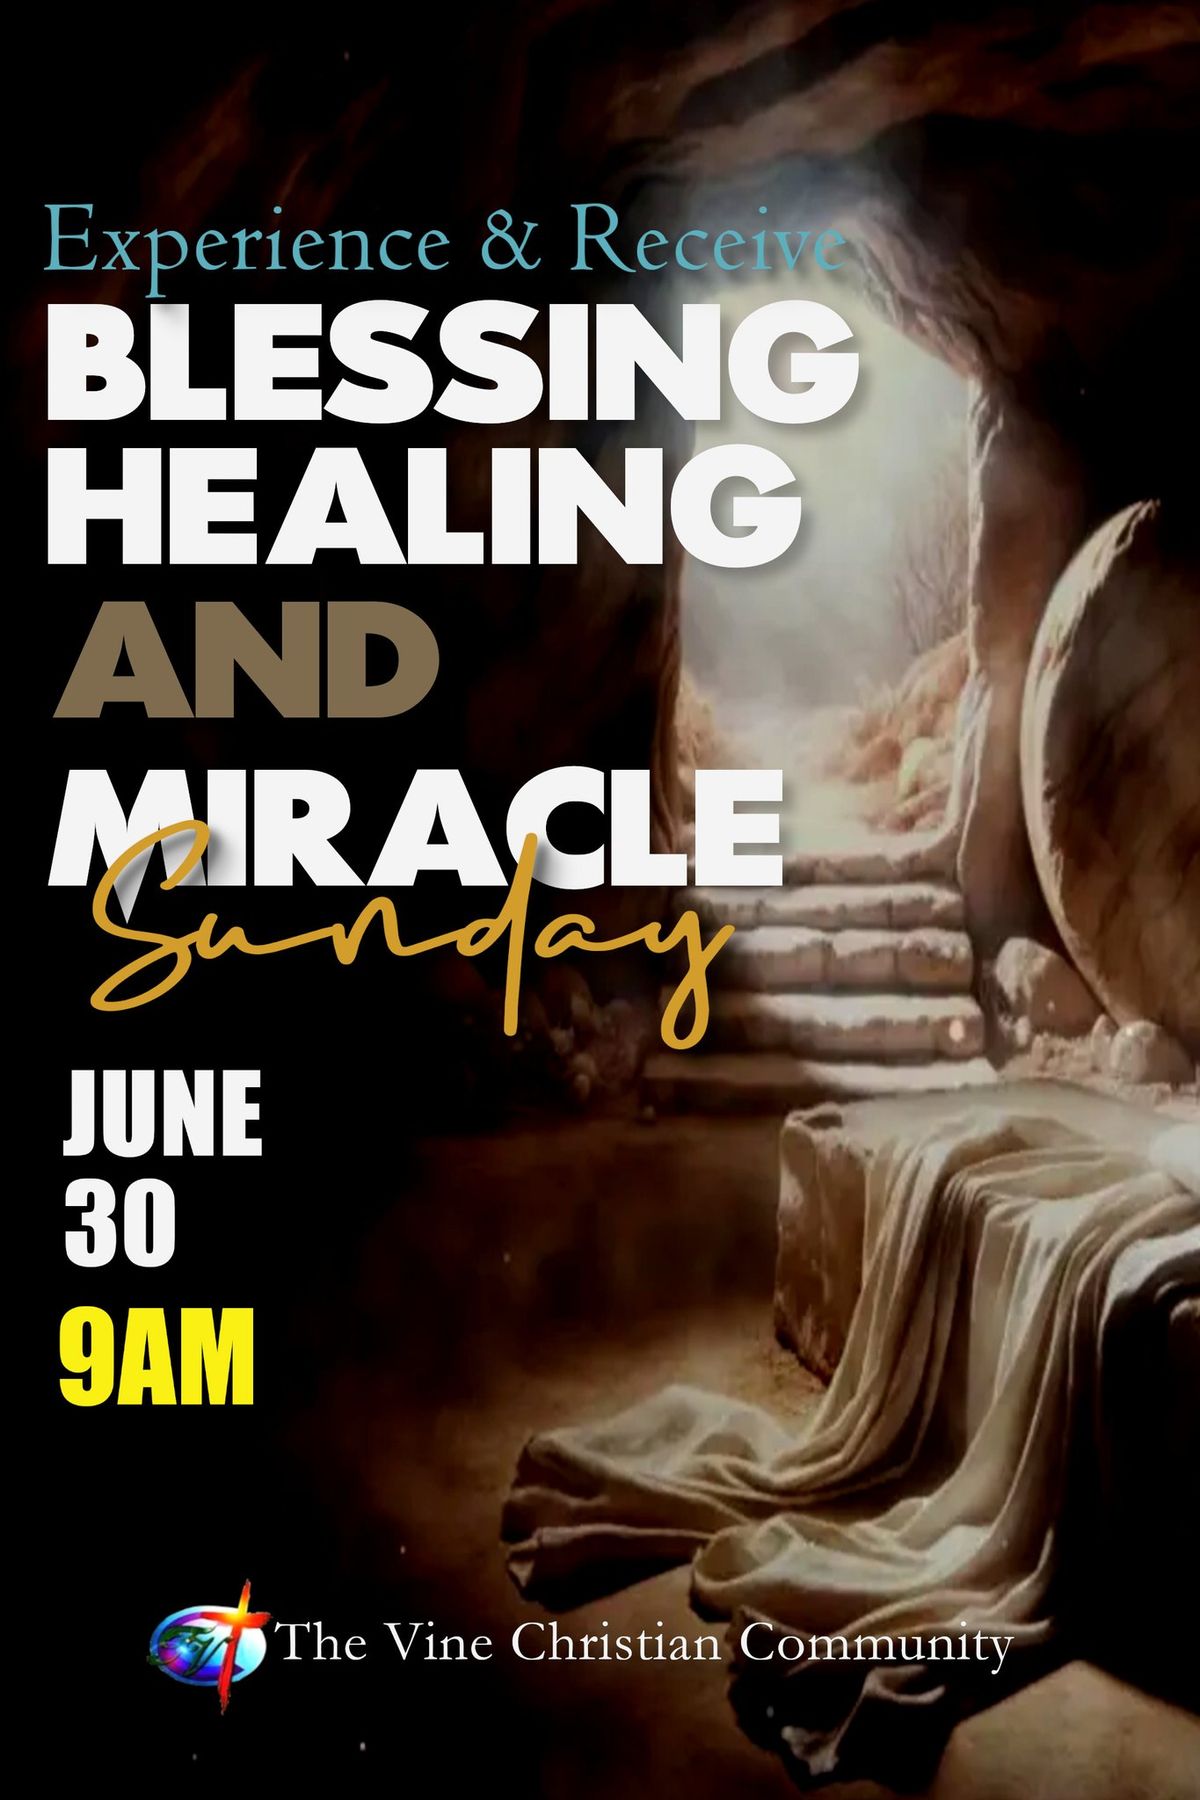 BHAM (Blessing Healing And Miracle  SUNDAY